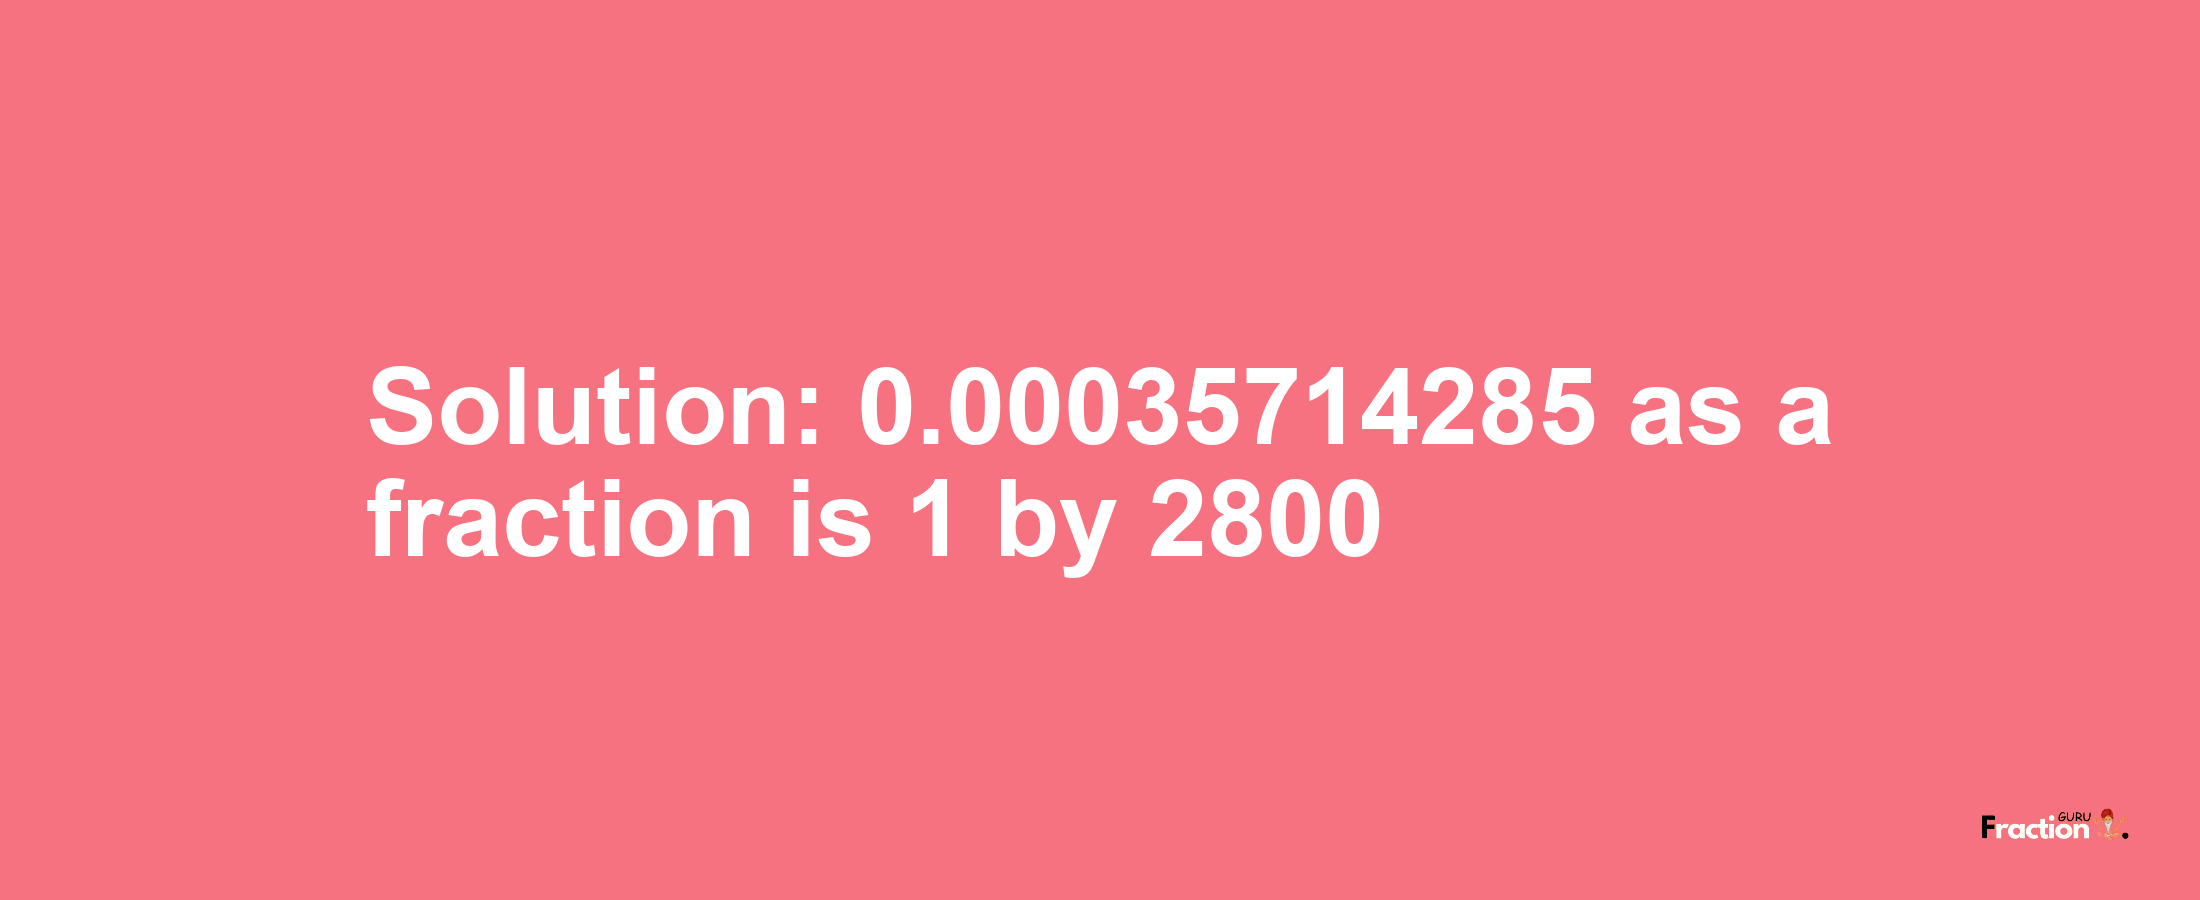 Solution:0.00035714285 as a fraction is 1/2800